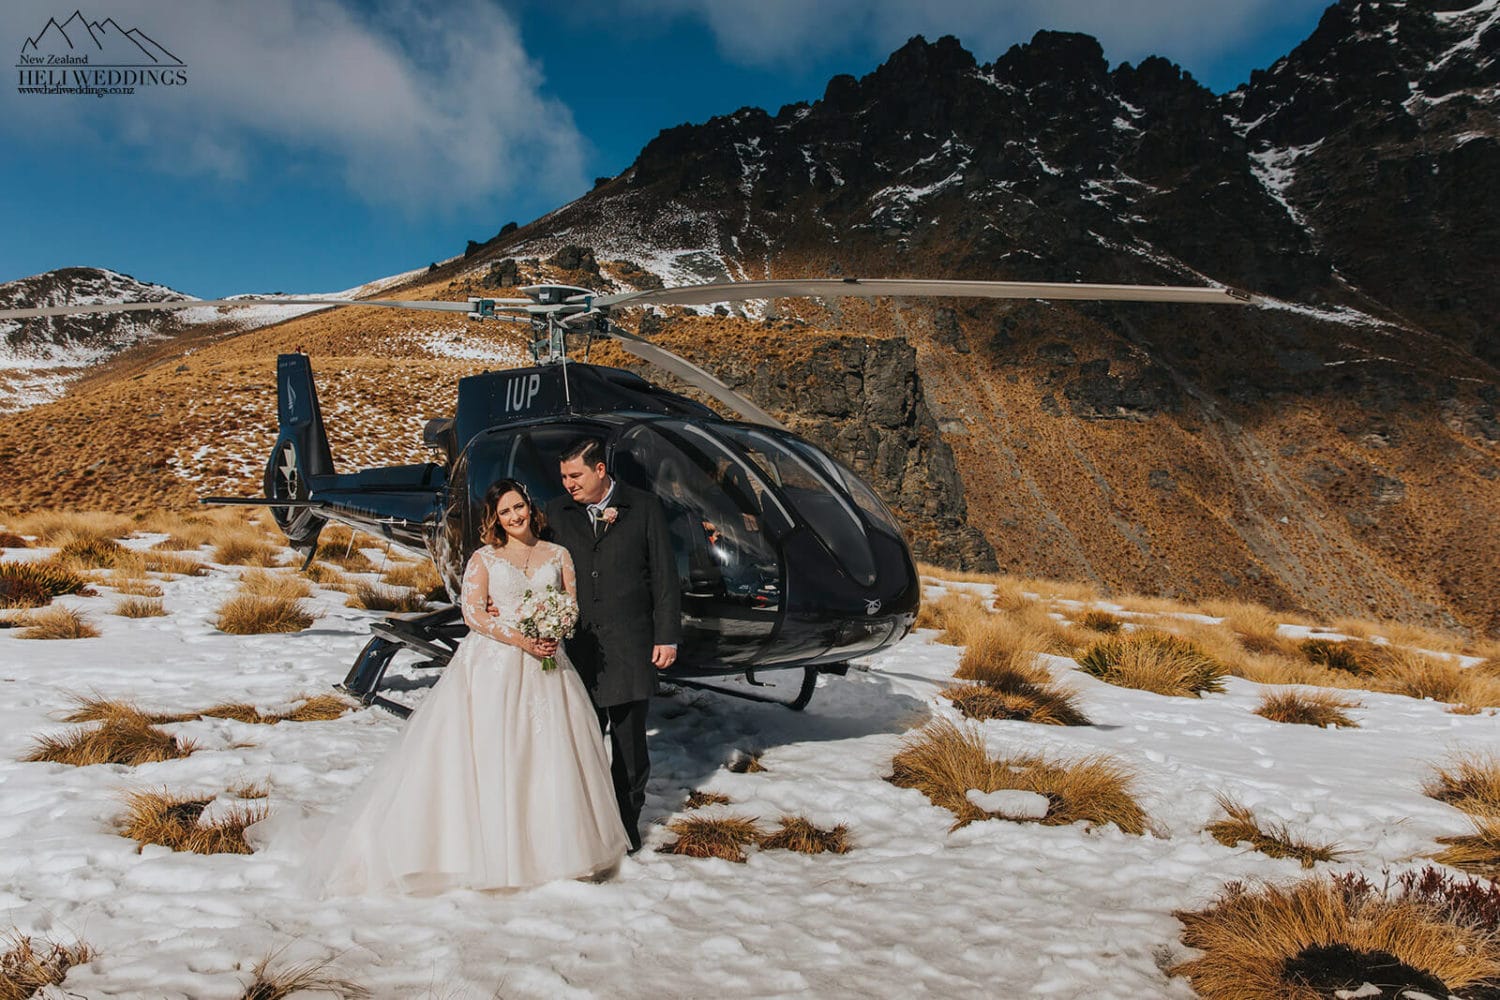 Bride and groom with helicopter in Queenstown